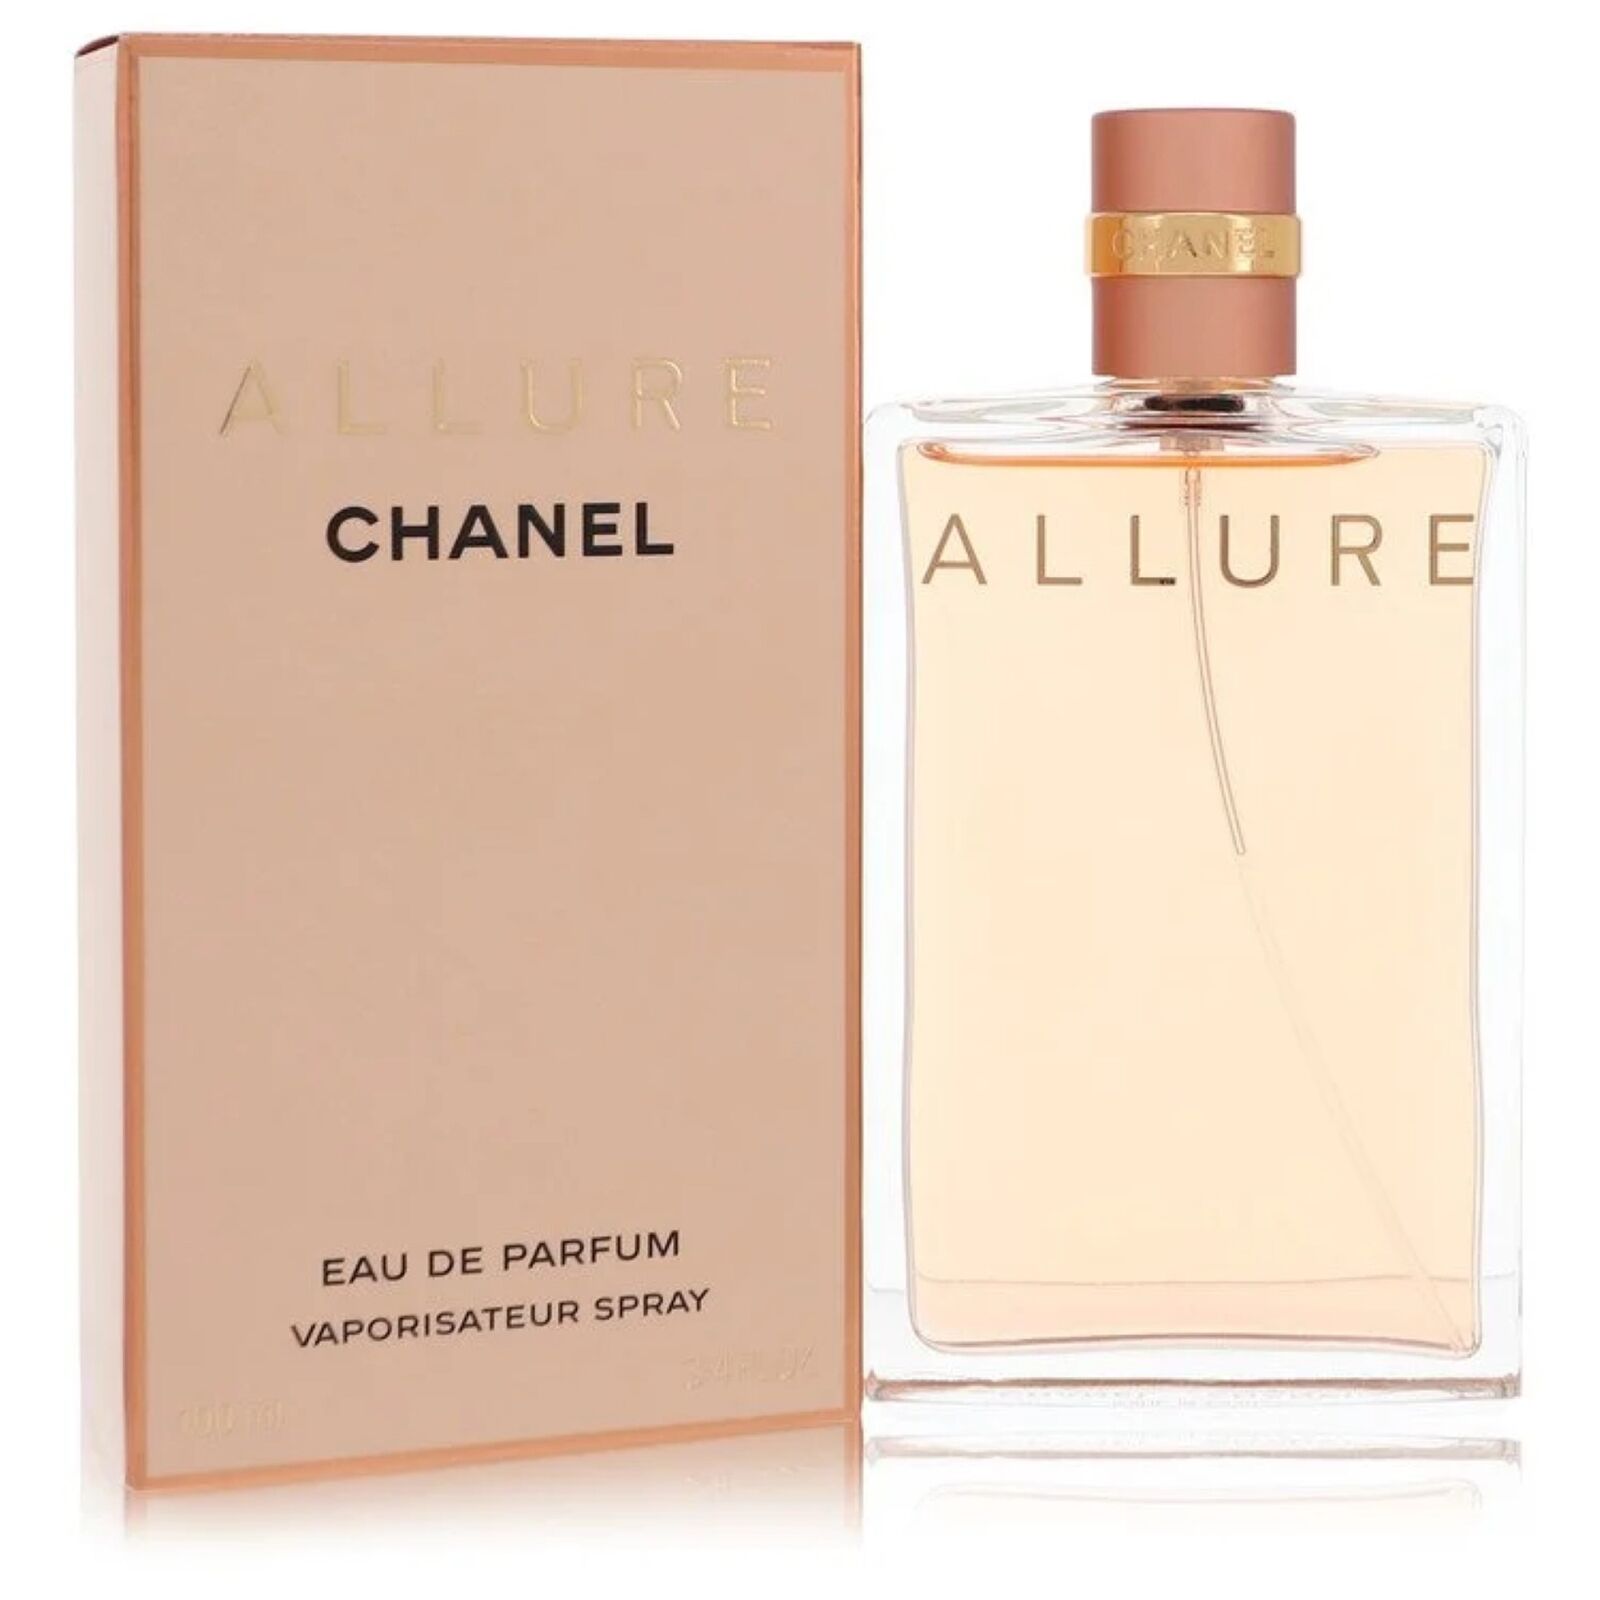 Allure EDP Spray Perfume 50 ml for Women by Chanel